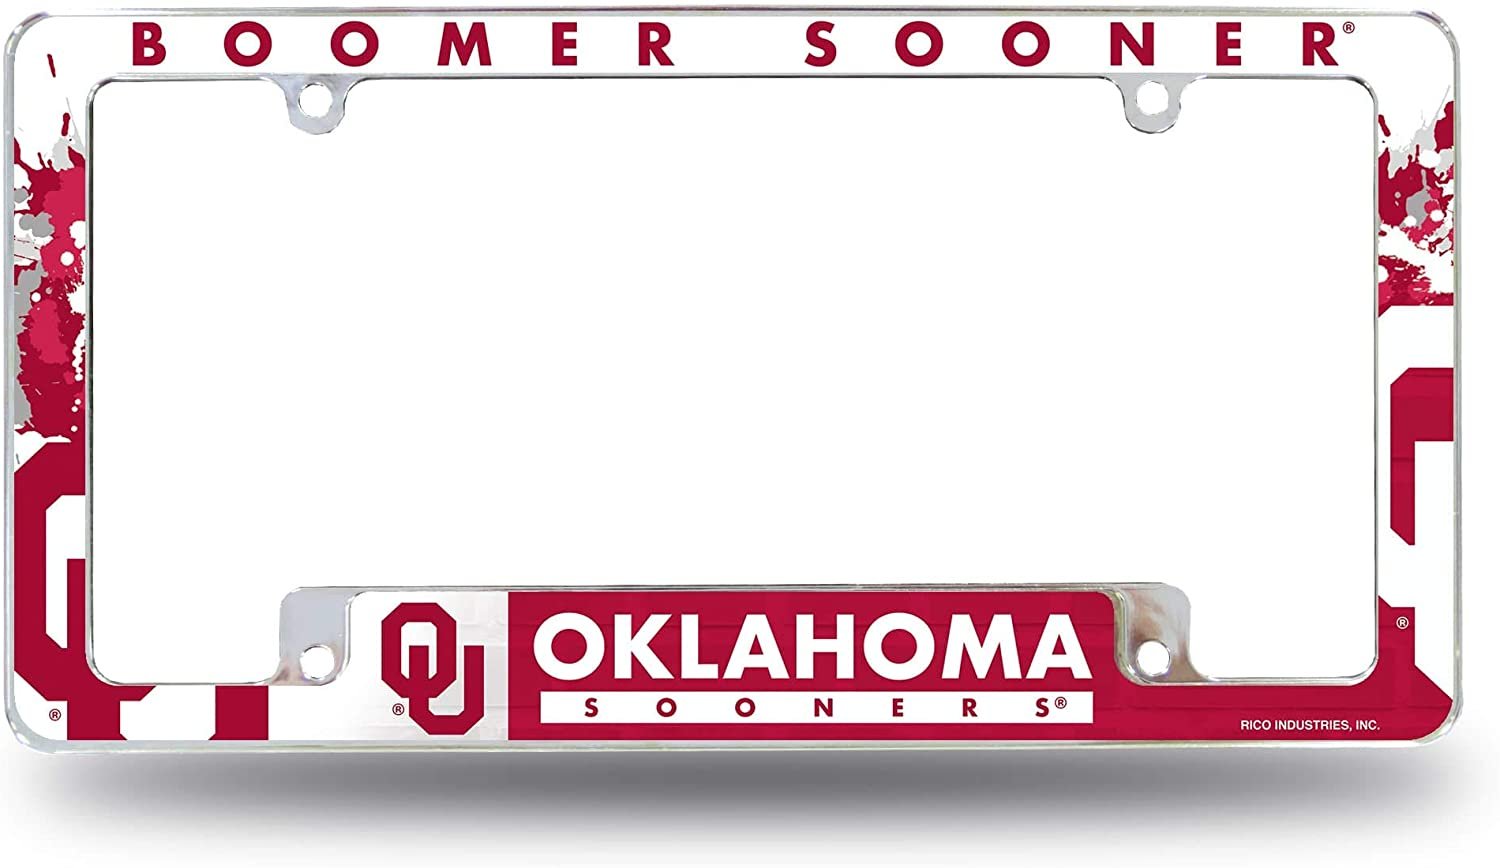 Oklahoma Sooners Metal License Plate Frame Tag Cover All Over Design University of